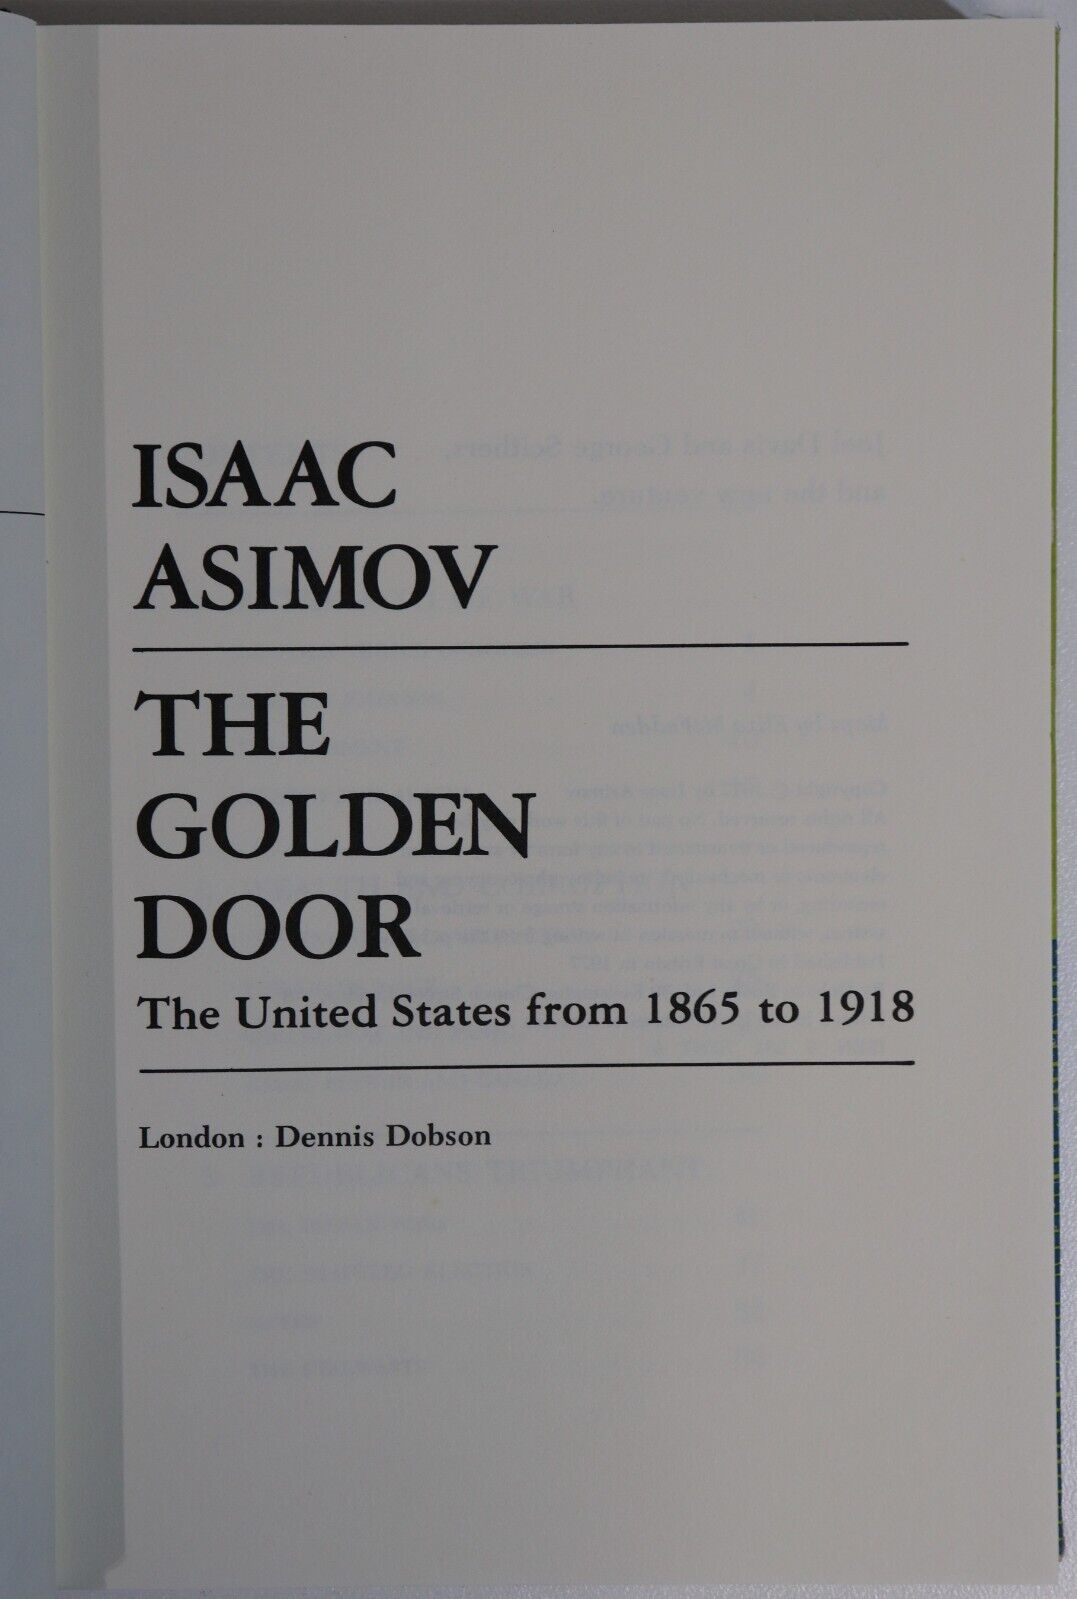 The Golden Door by Isaac Asimov - 1977 - Vintage American History Book - 0